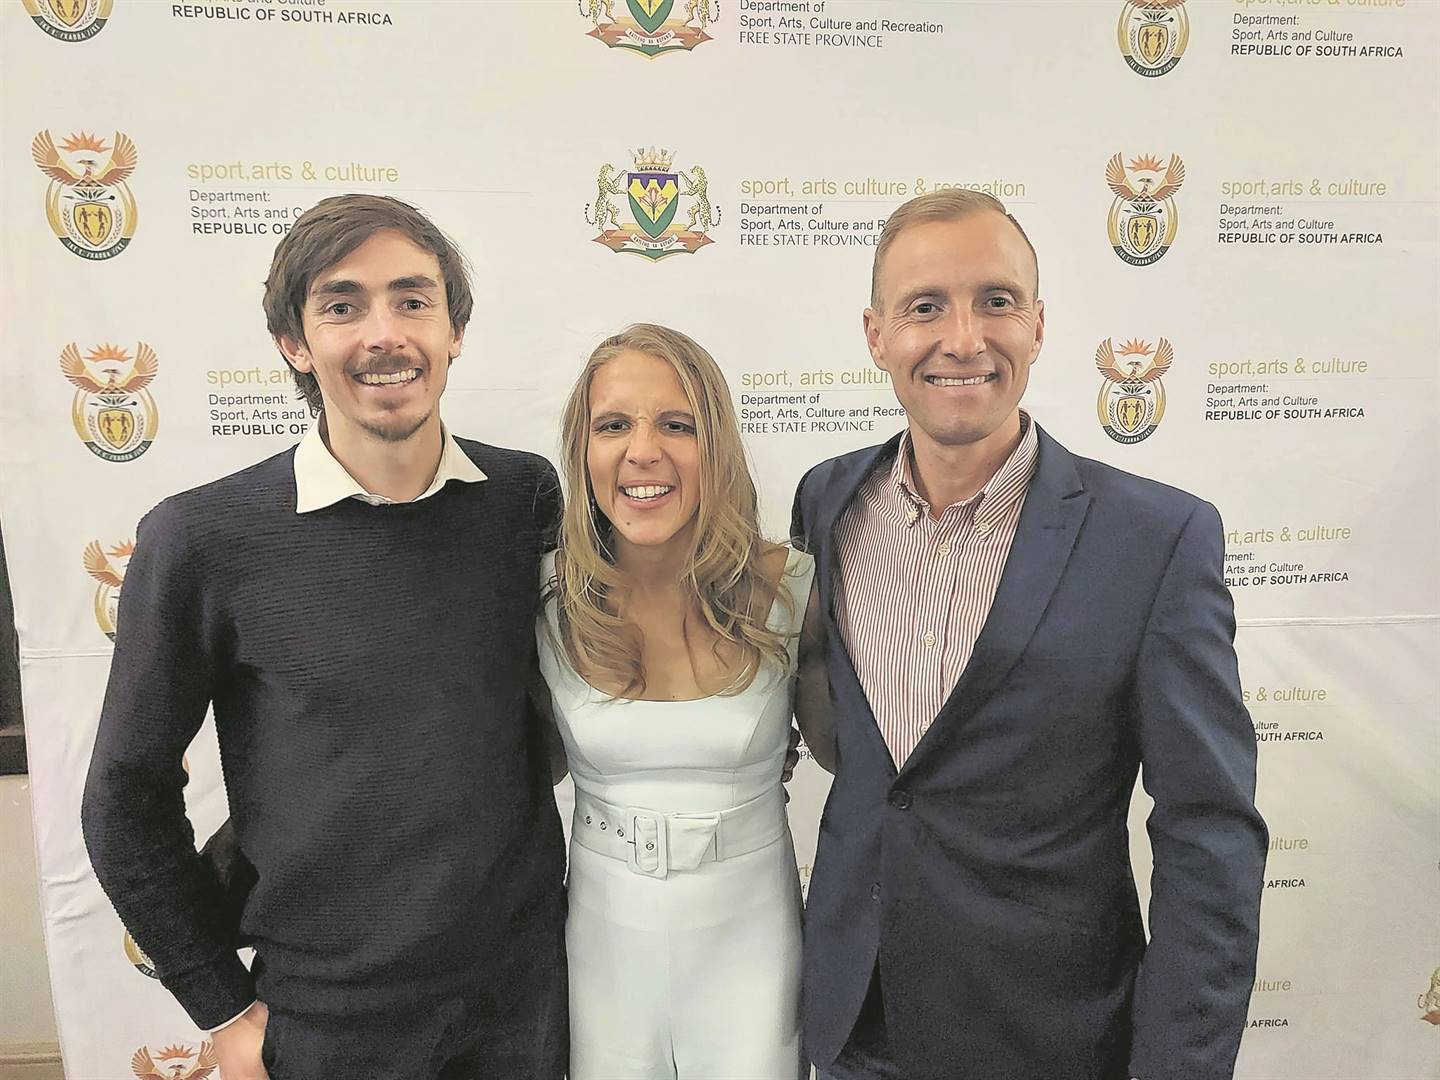 Stars with disabilities honoured in earnest
Latest